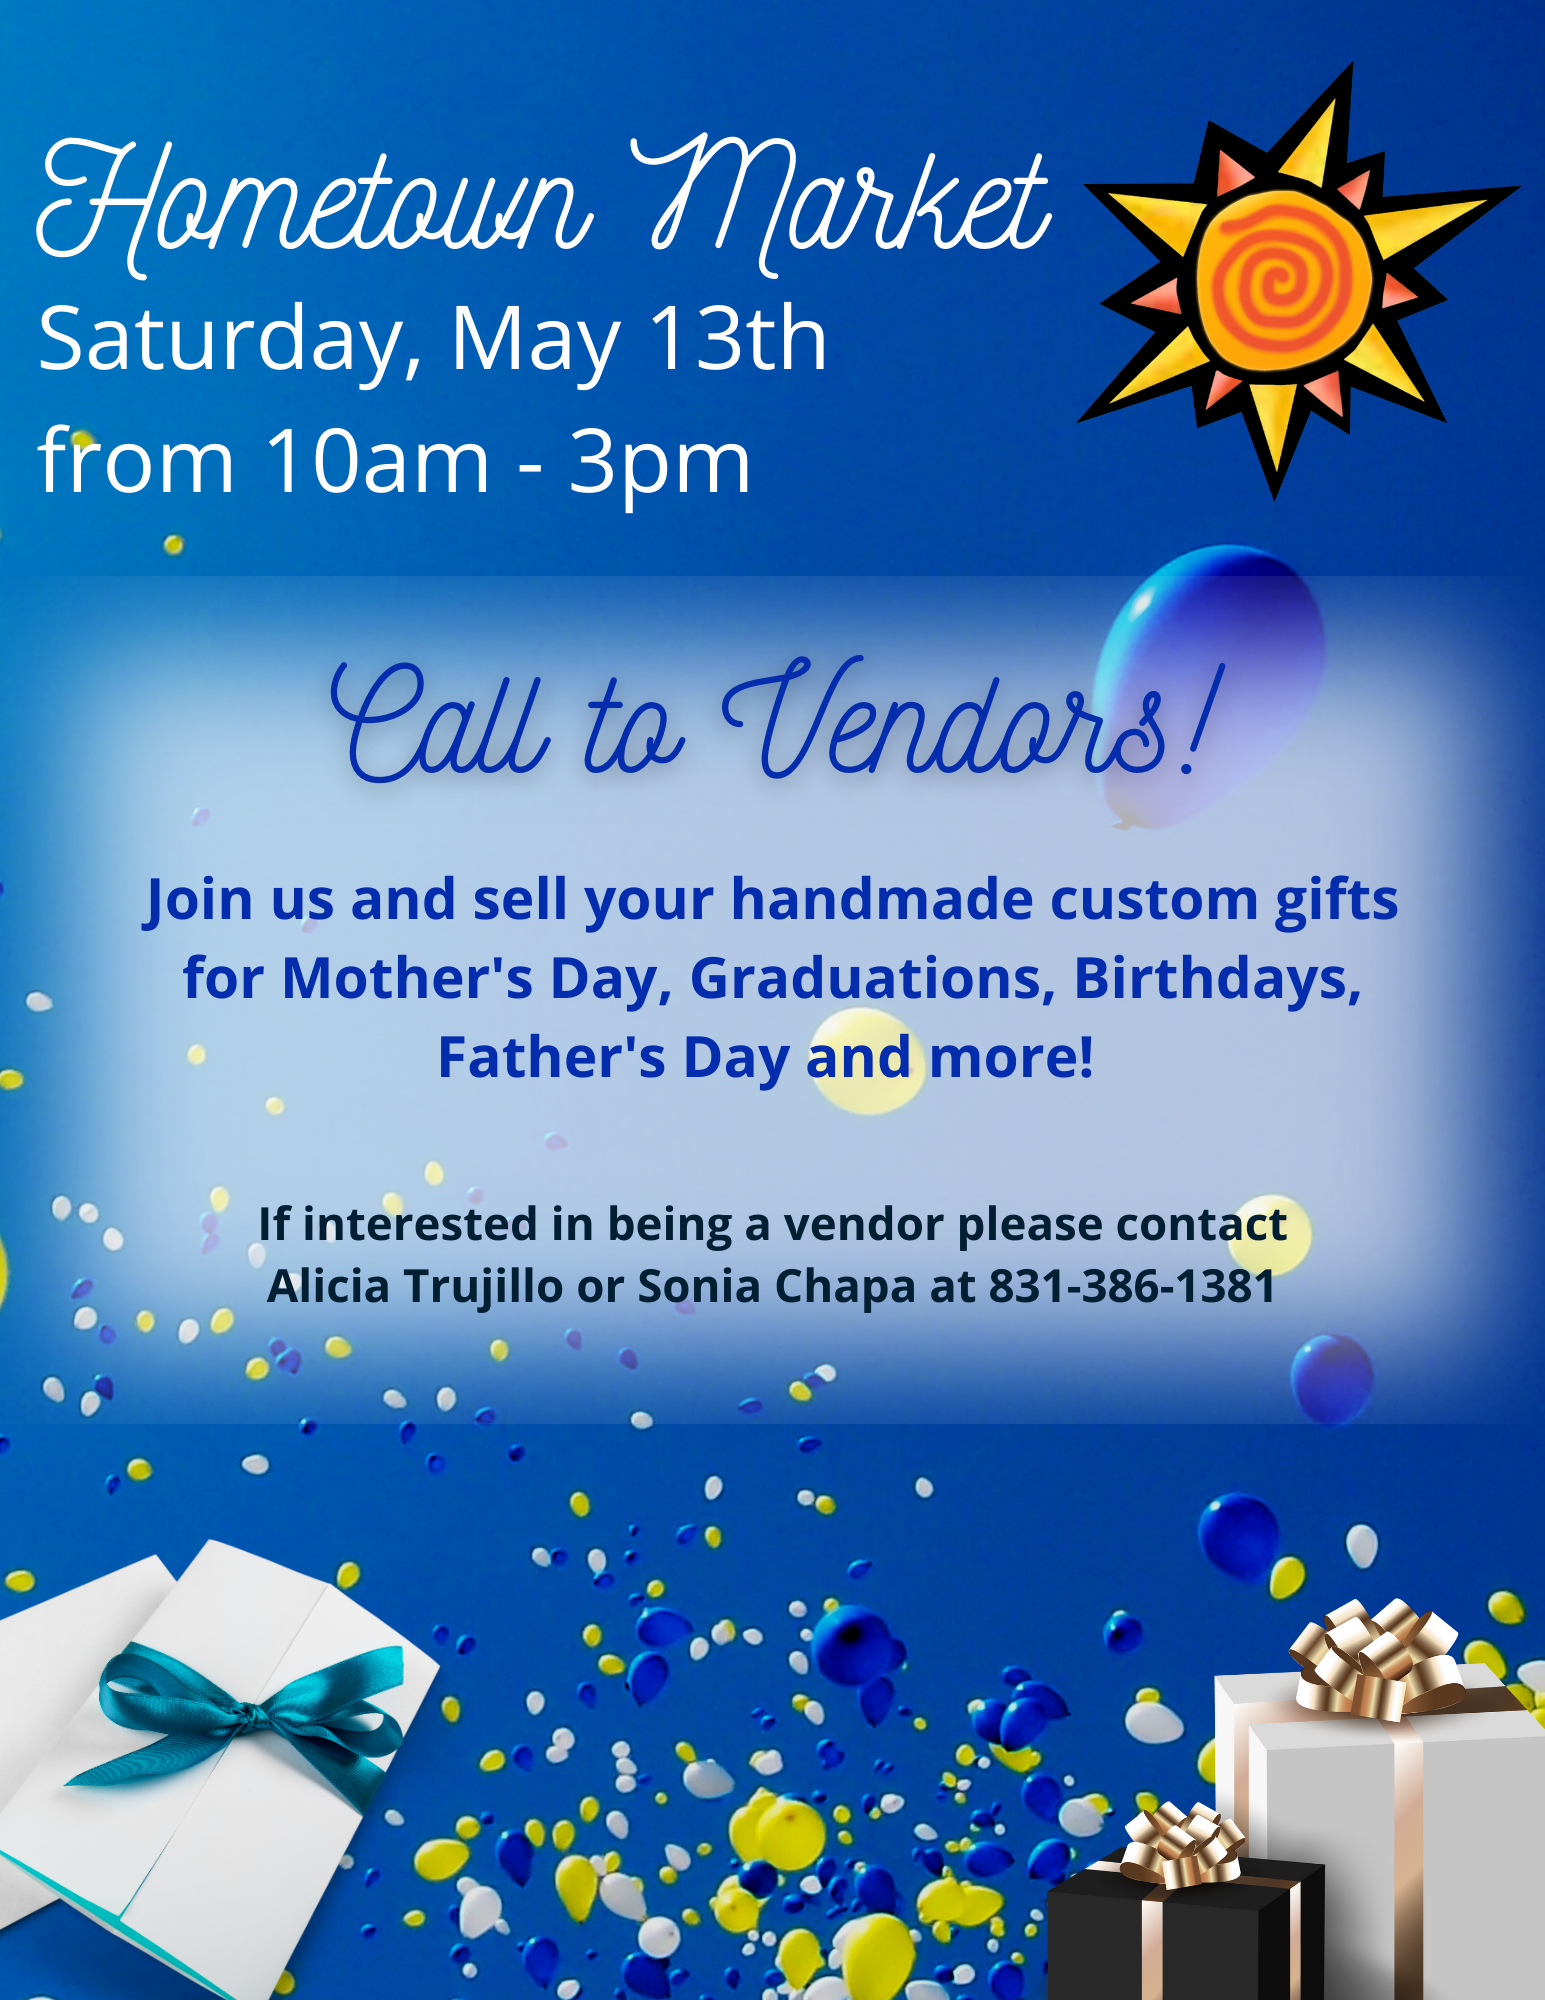 Flyer for "Call to Vendors" for Sol Treasures Hometown Market on Saturday May 13th from 10am - 3pm.